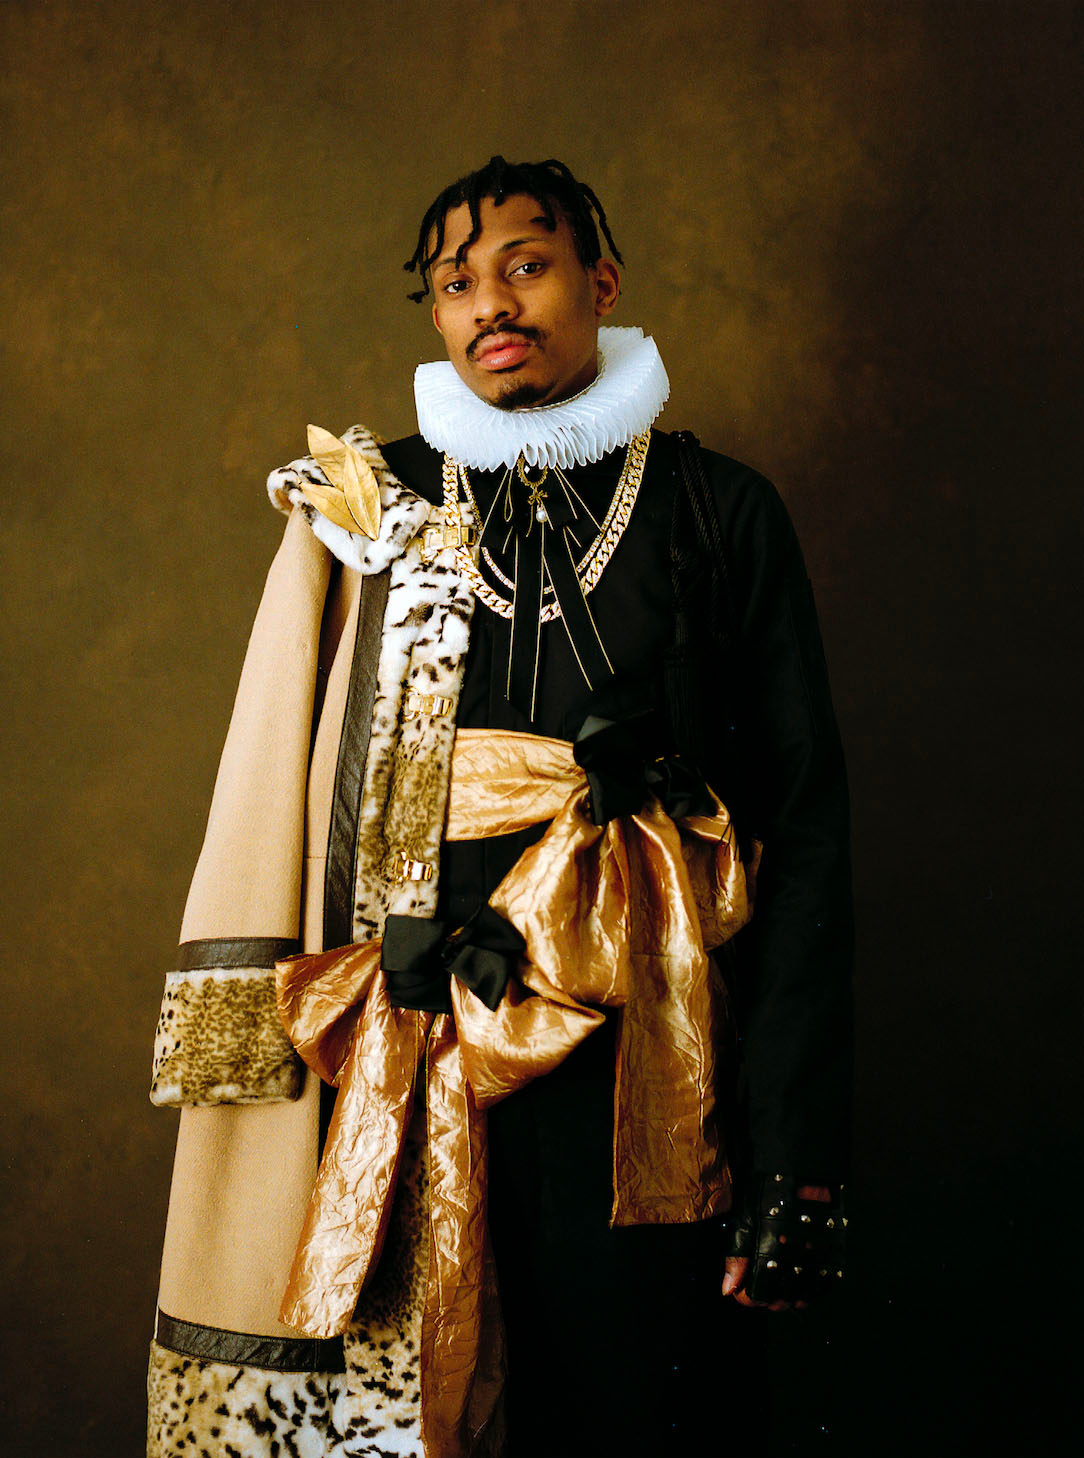 A photographic portrait of a dignified, dark-skinned figure staring out at the viewer, wearing a formal ensemble featuring a stiff collar, a fur-trimmed coat on one shoulder, two large, fabric bows, and a gold chain.